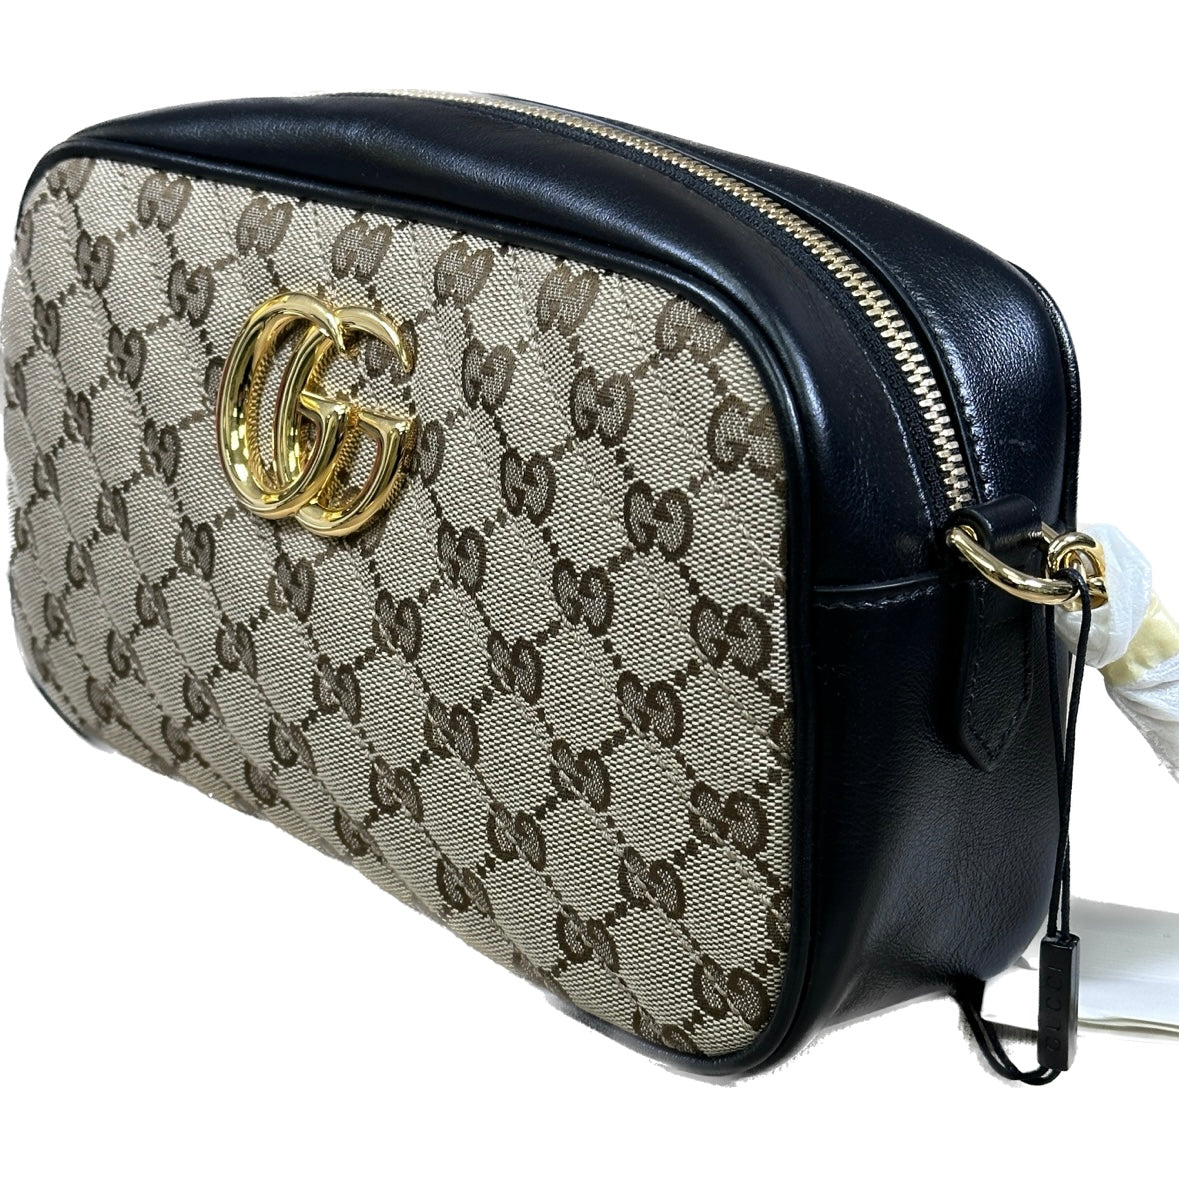 Gucci Black GG Canvas and Leather Crossbody Bag Gucci